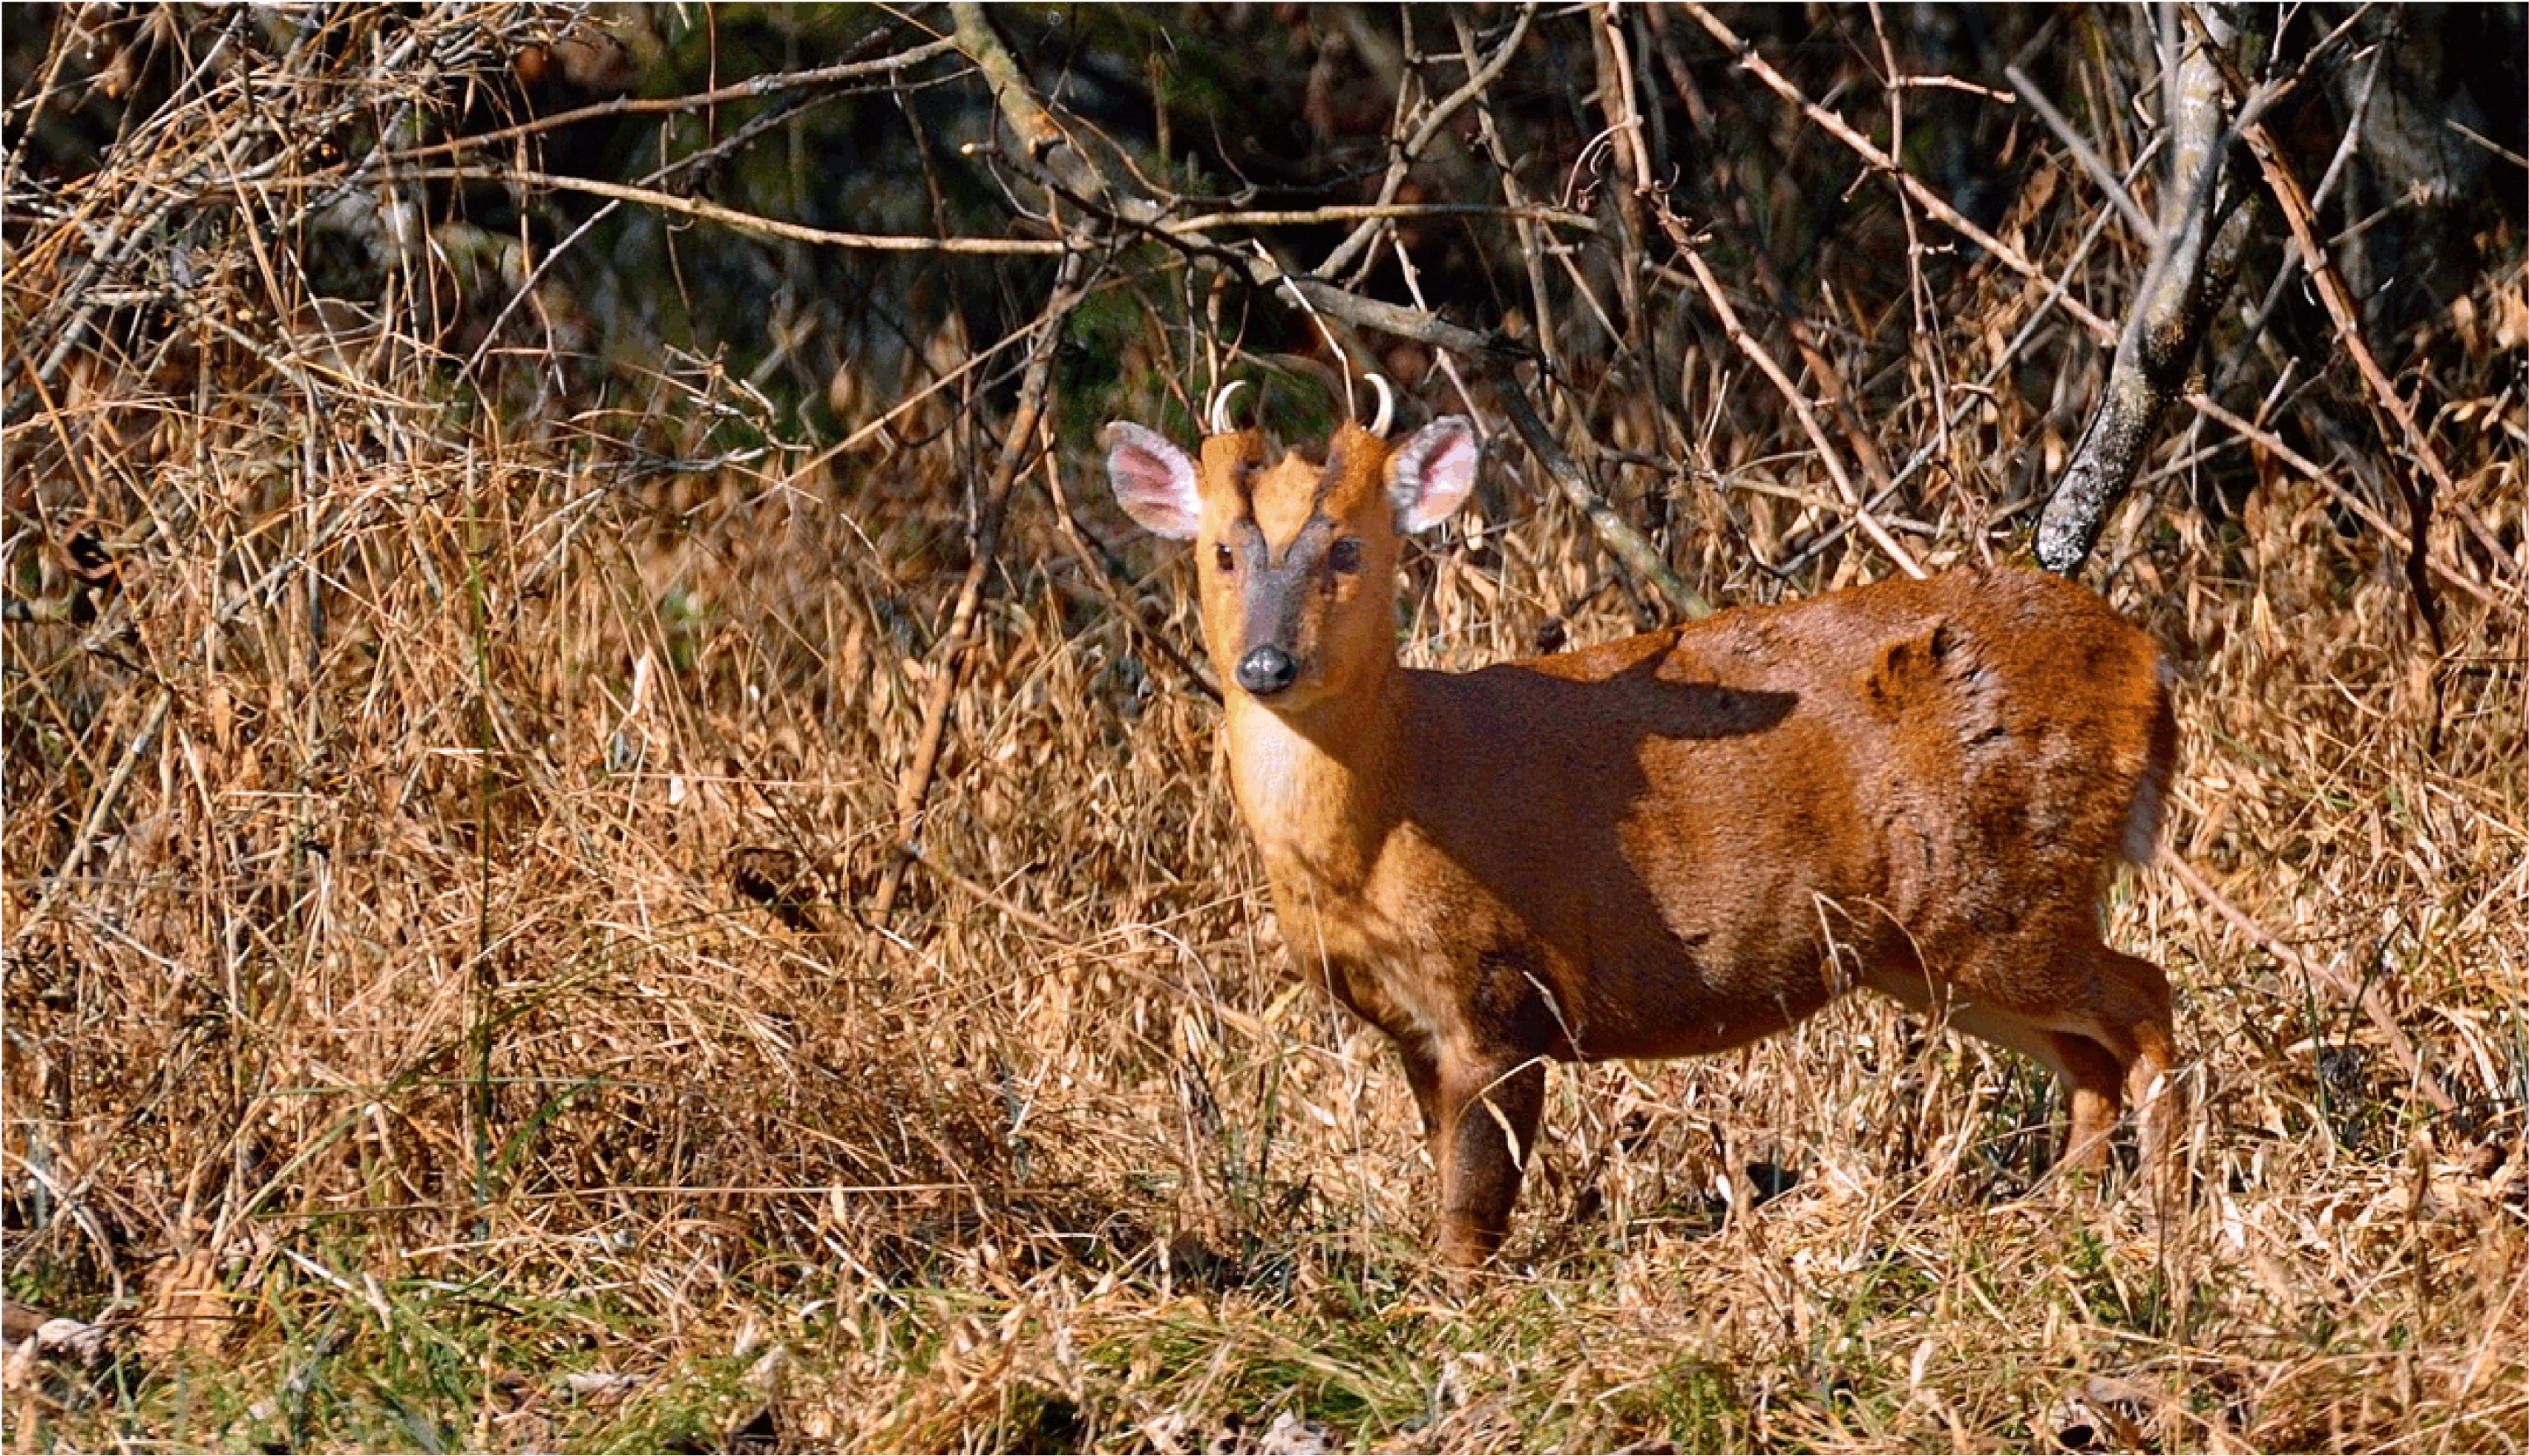 A small deer with the smallest numbers of chromosomes in mammals